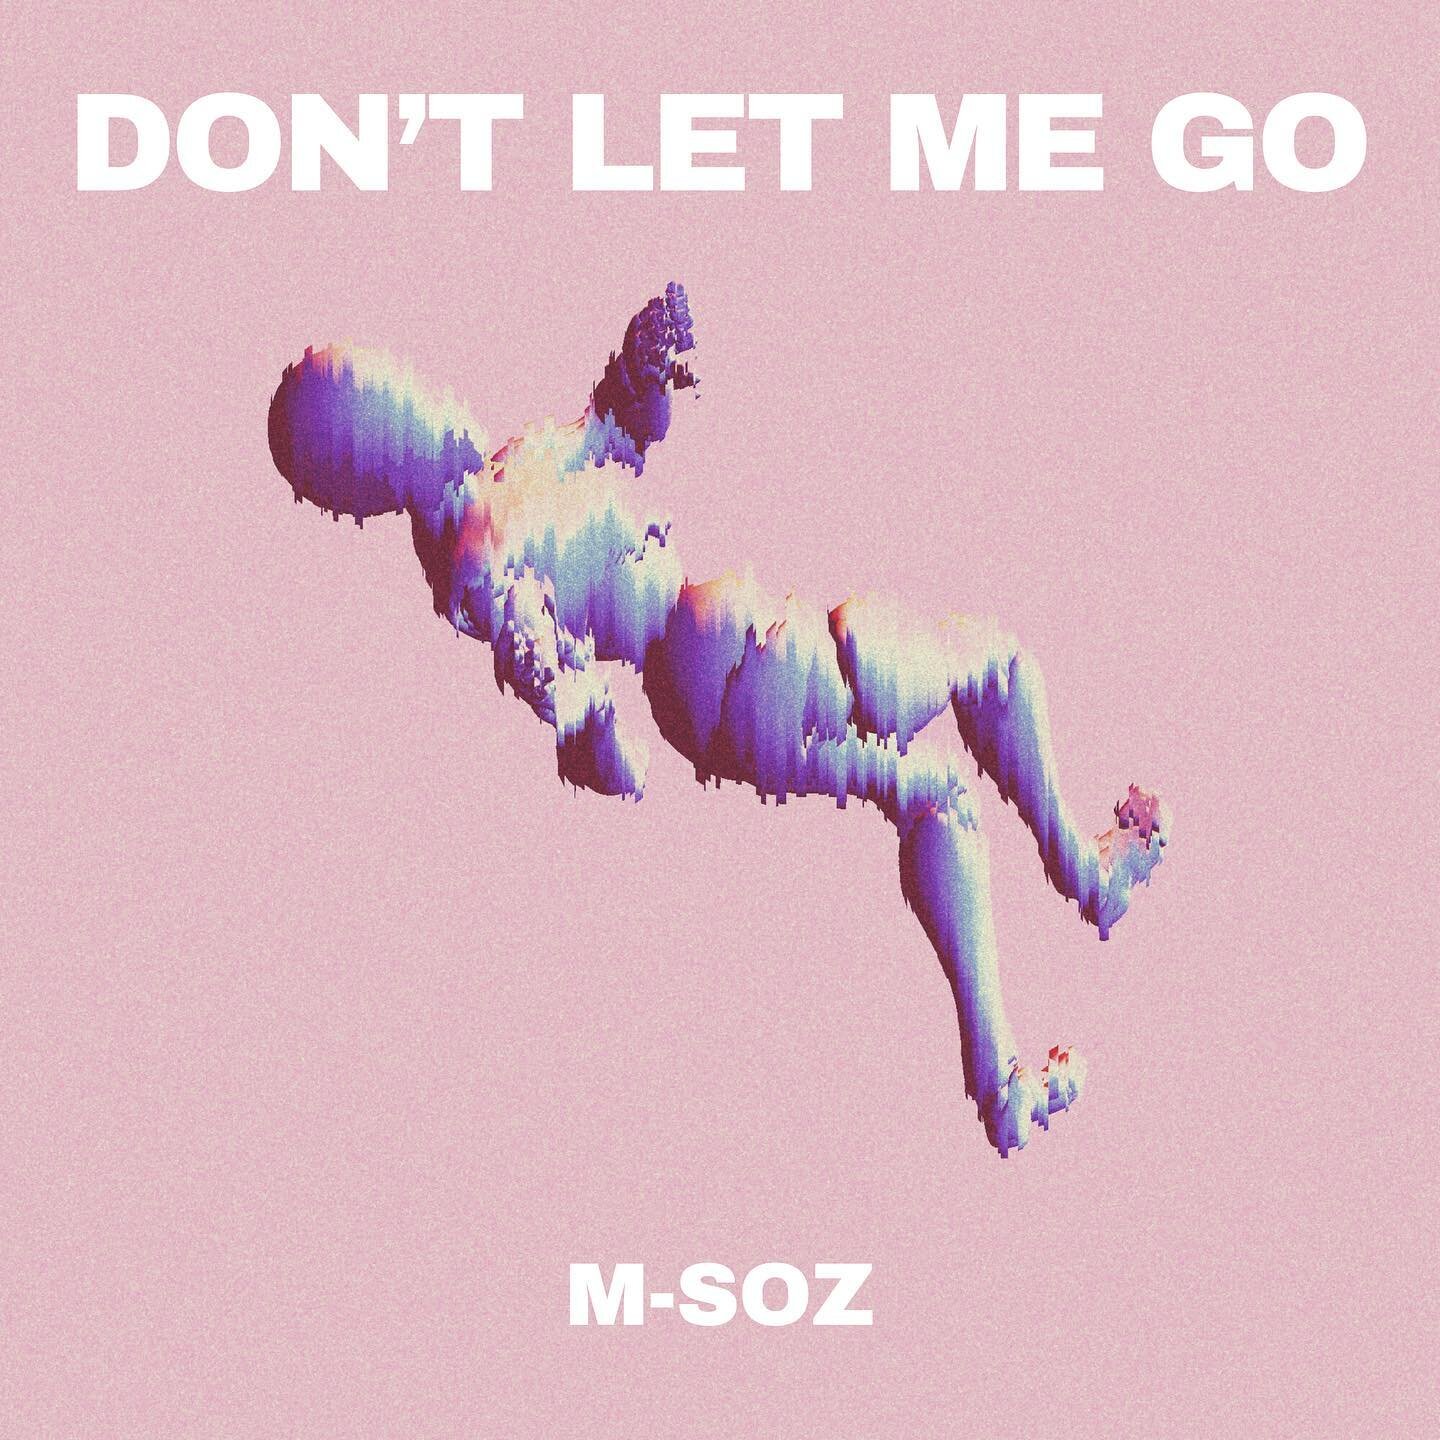 &ldquo;Don&rsquo;t Let Me Go&rdquo; is available NOW everywhere&mdash;almost summer vibes 🏖️